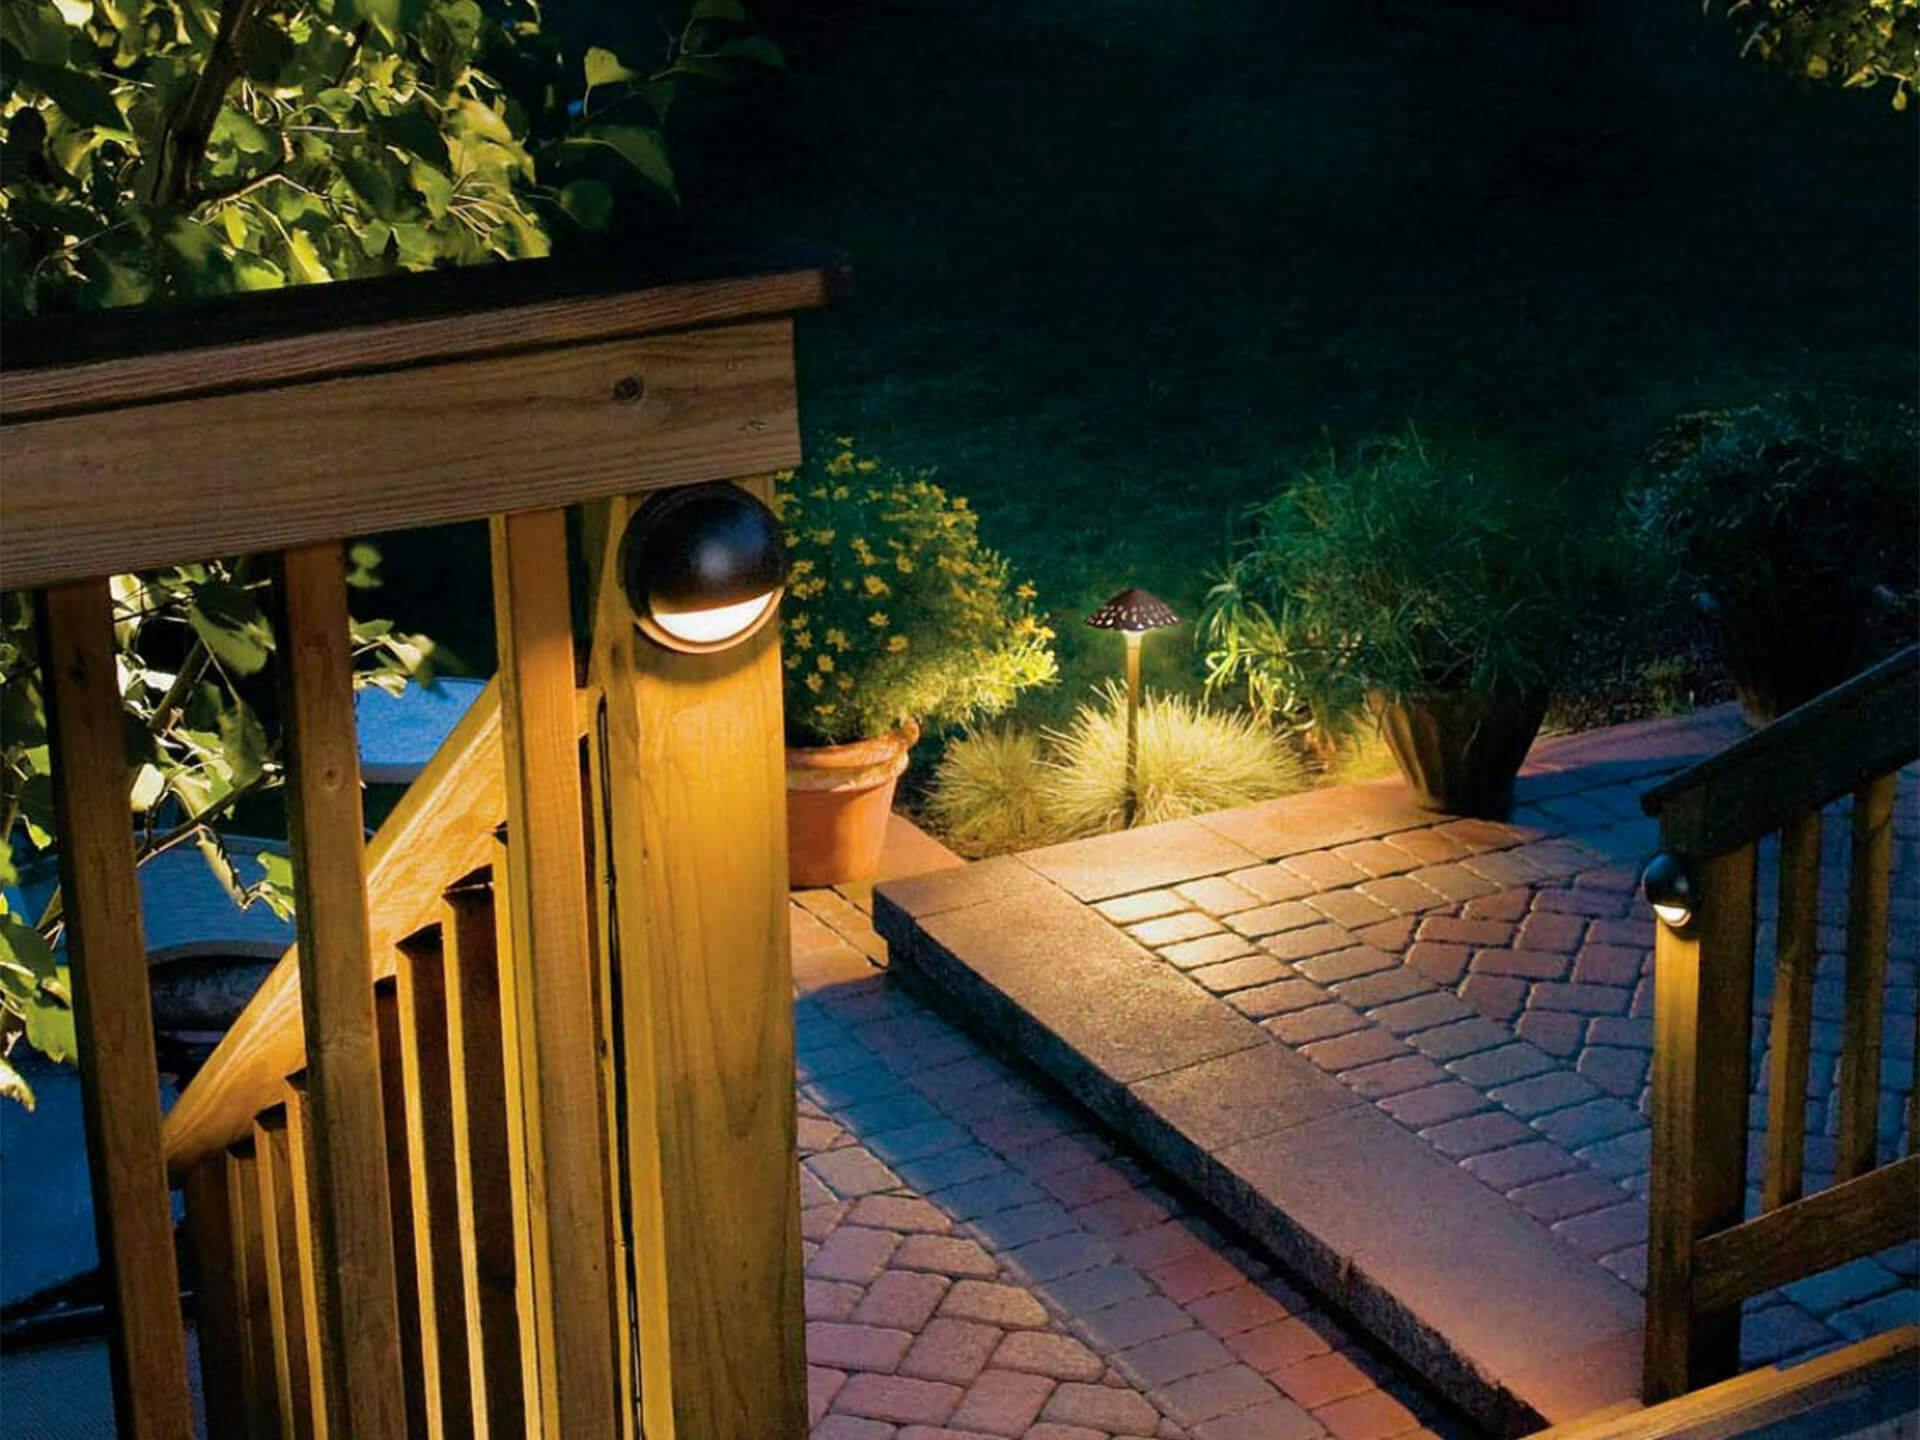 Back patio at night featuring attached lights on the posts